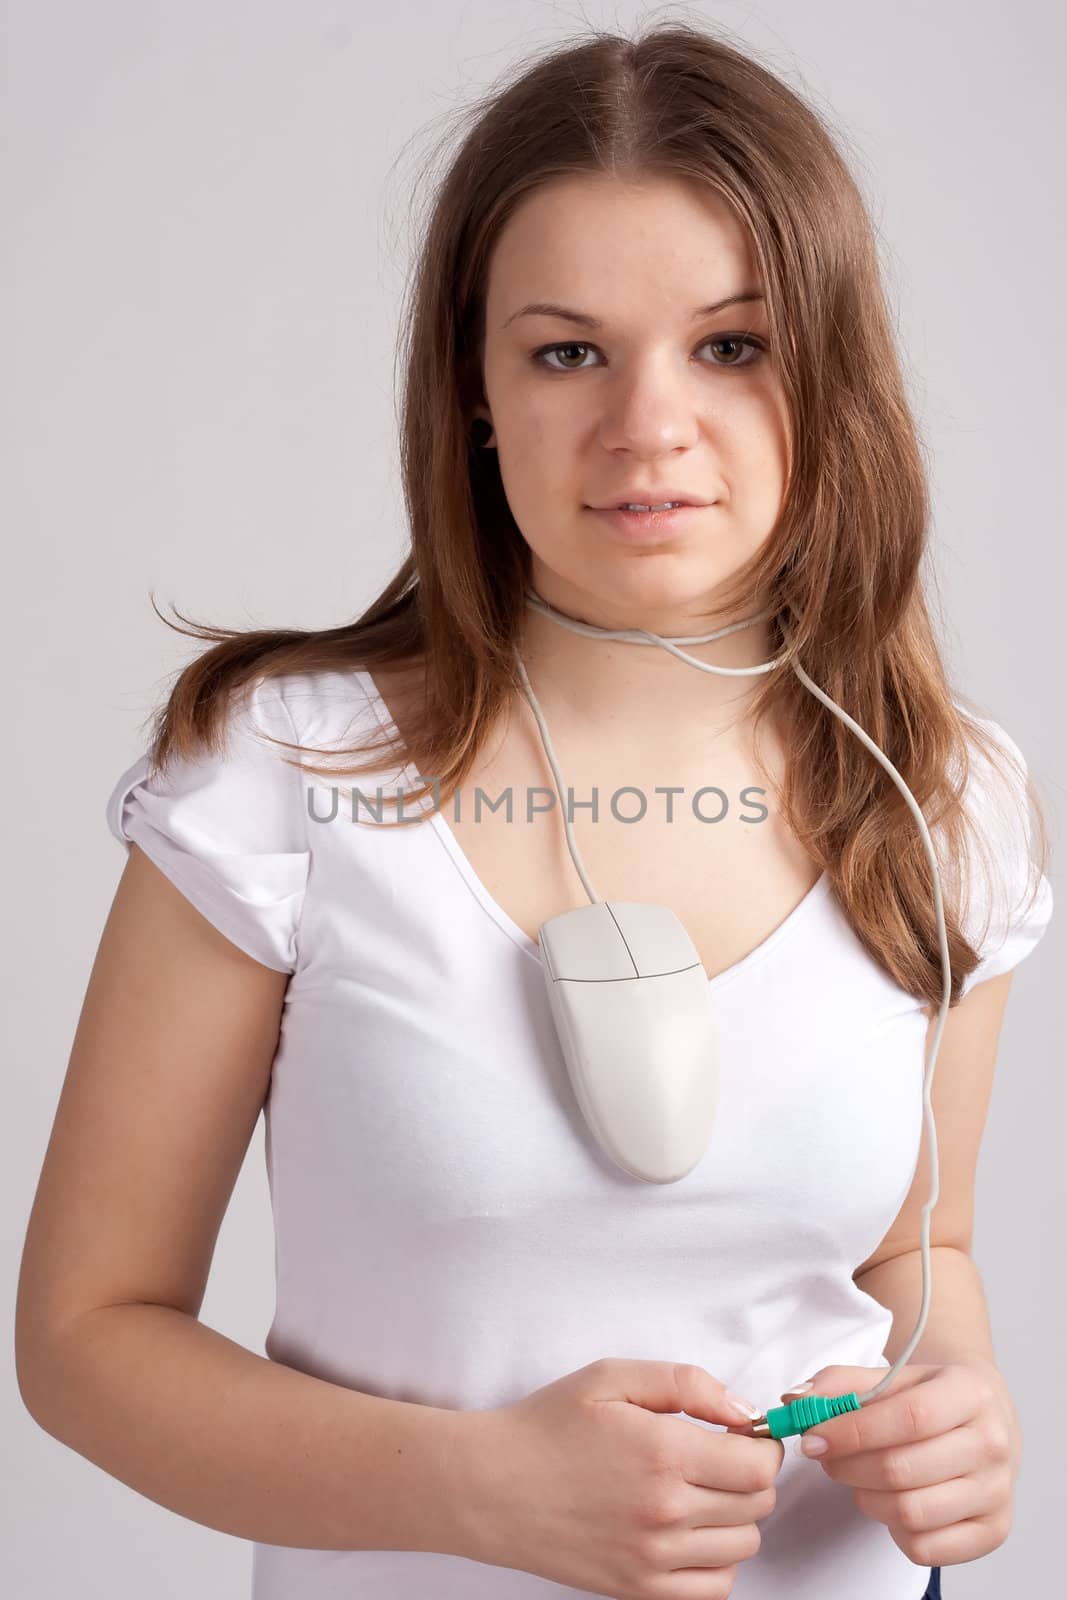 girl with a computer mouse in the neck